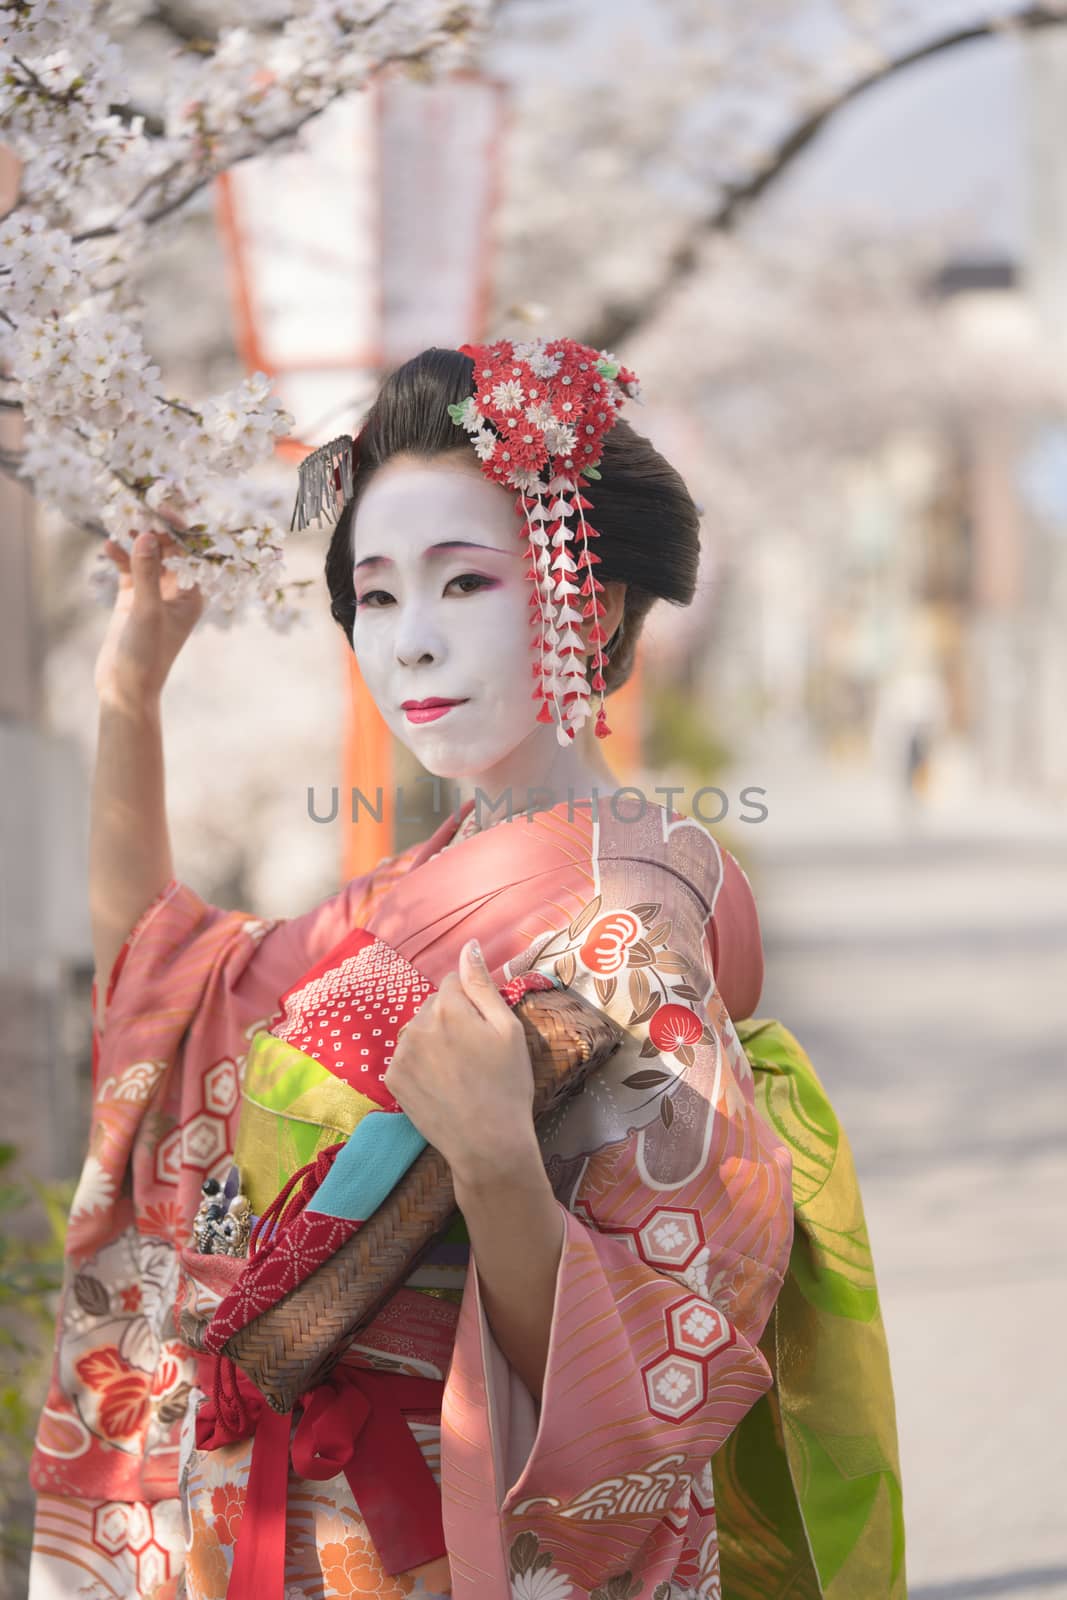 Maiko in kimono with kanzashi pins and holding a cherry branch in Kyoto's Gion district.